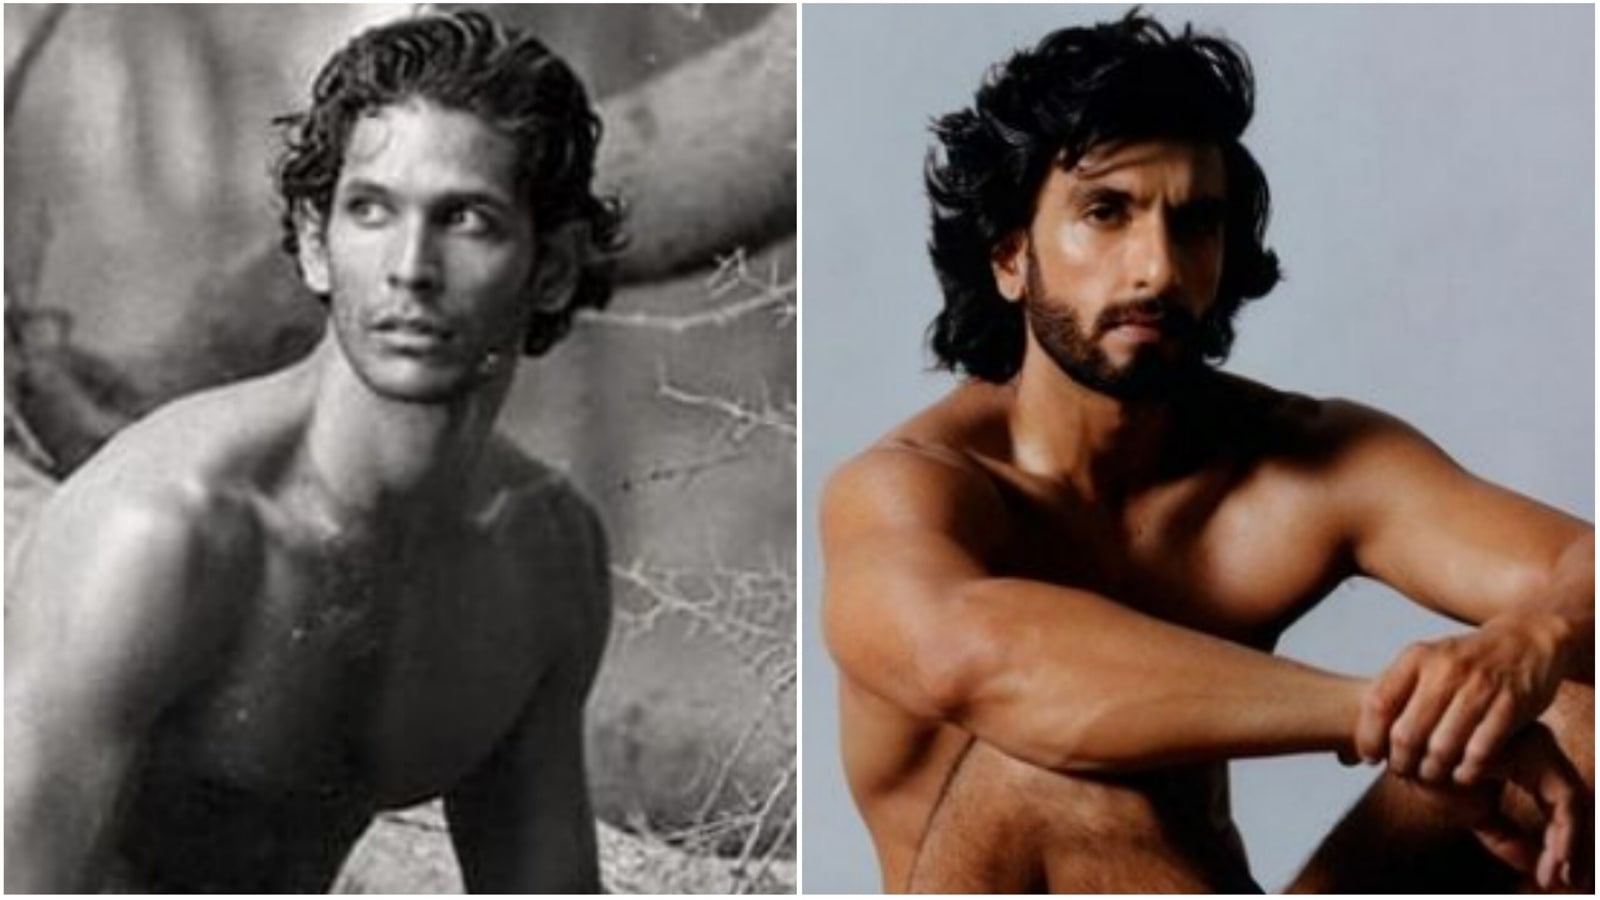 Top Nudist Ethnic - Milind Soman reacts to FIR against Ranveer Singh for nude photoshoot |  Bollywood - Hindustan Times